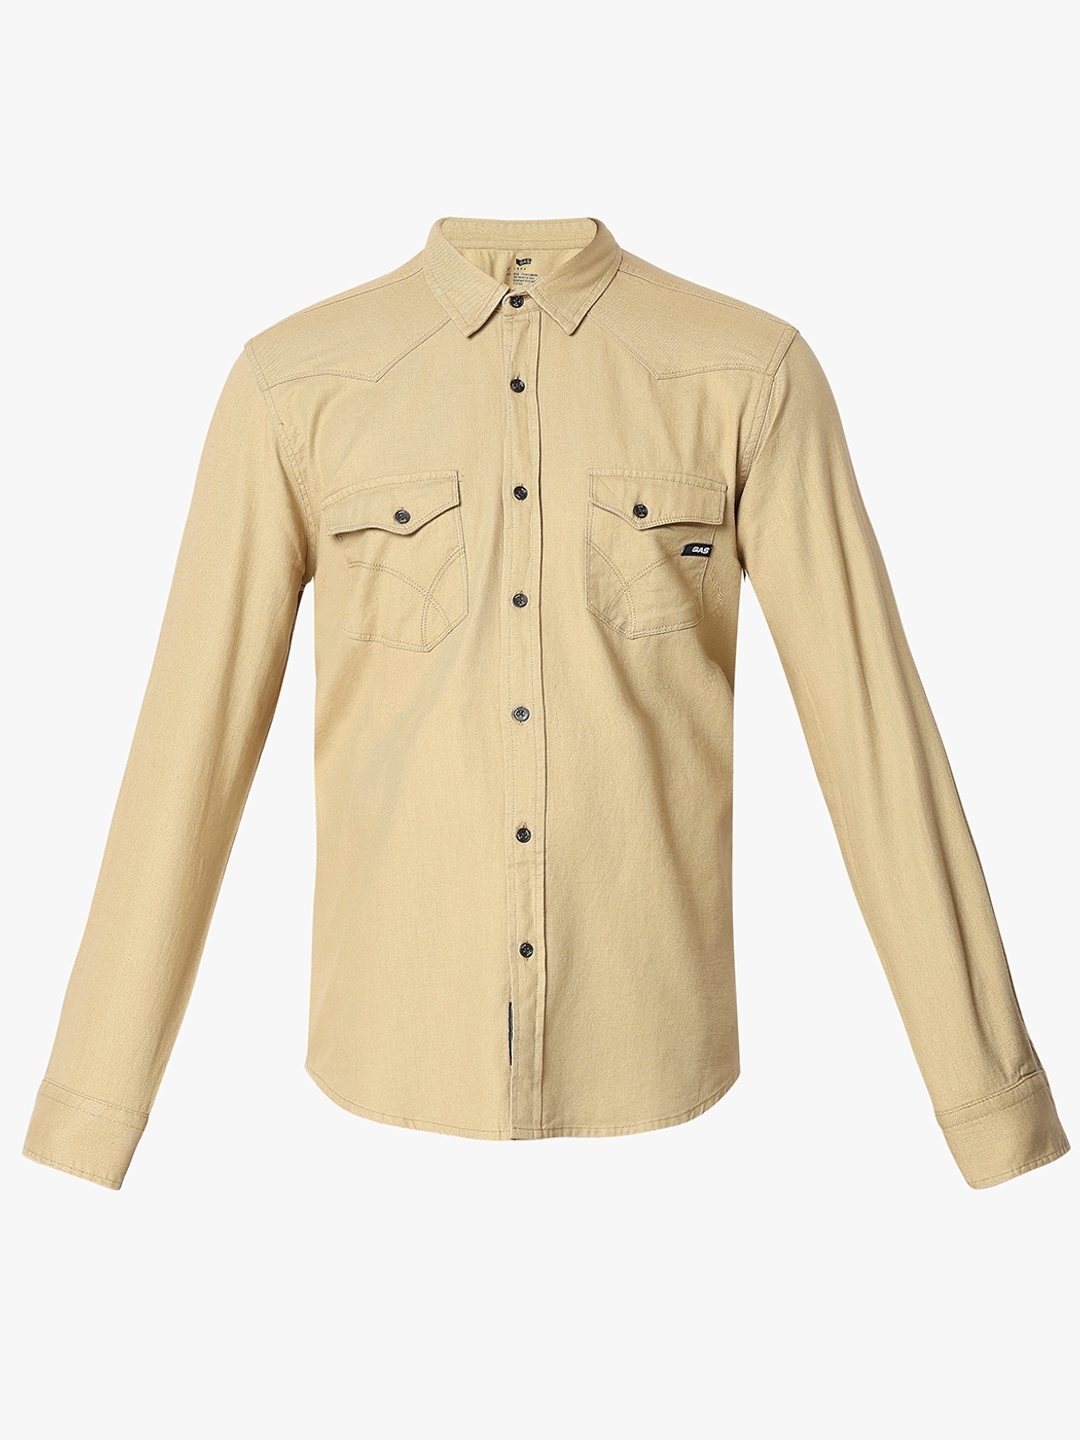 Relaxed Fit Full Sleeve Solid Cotton Linen Shirts